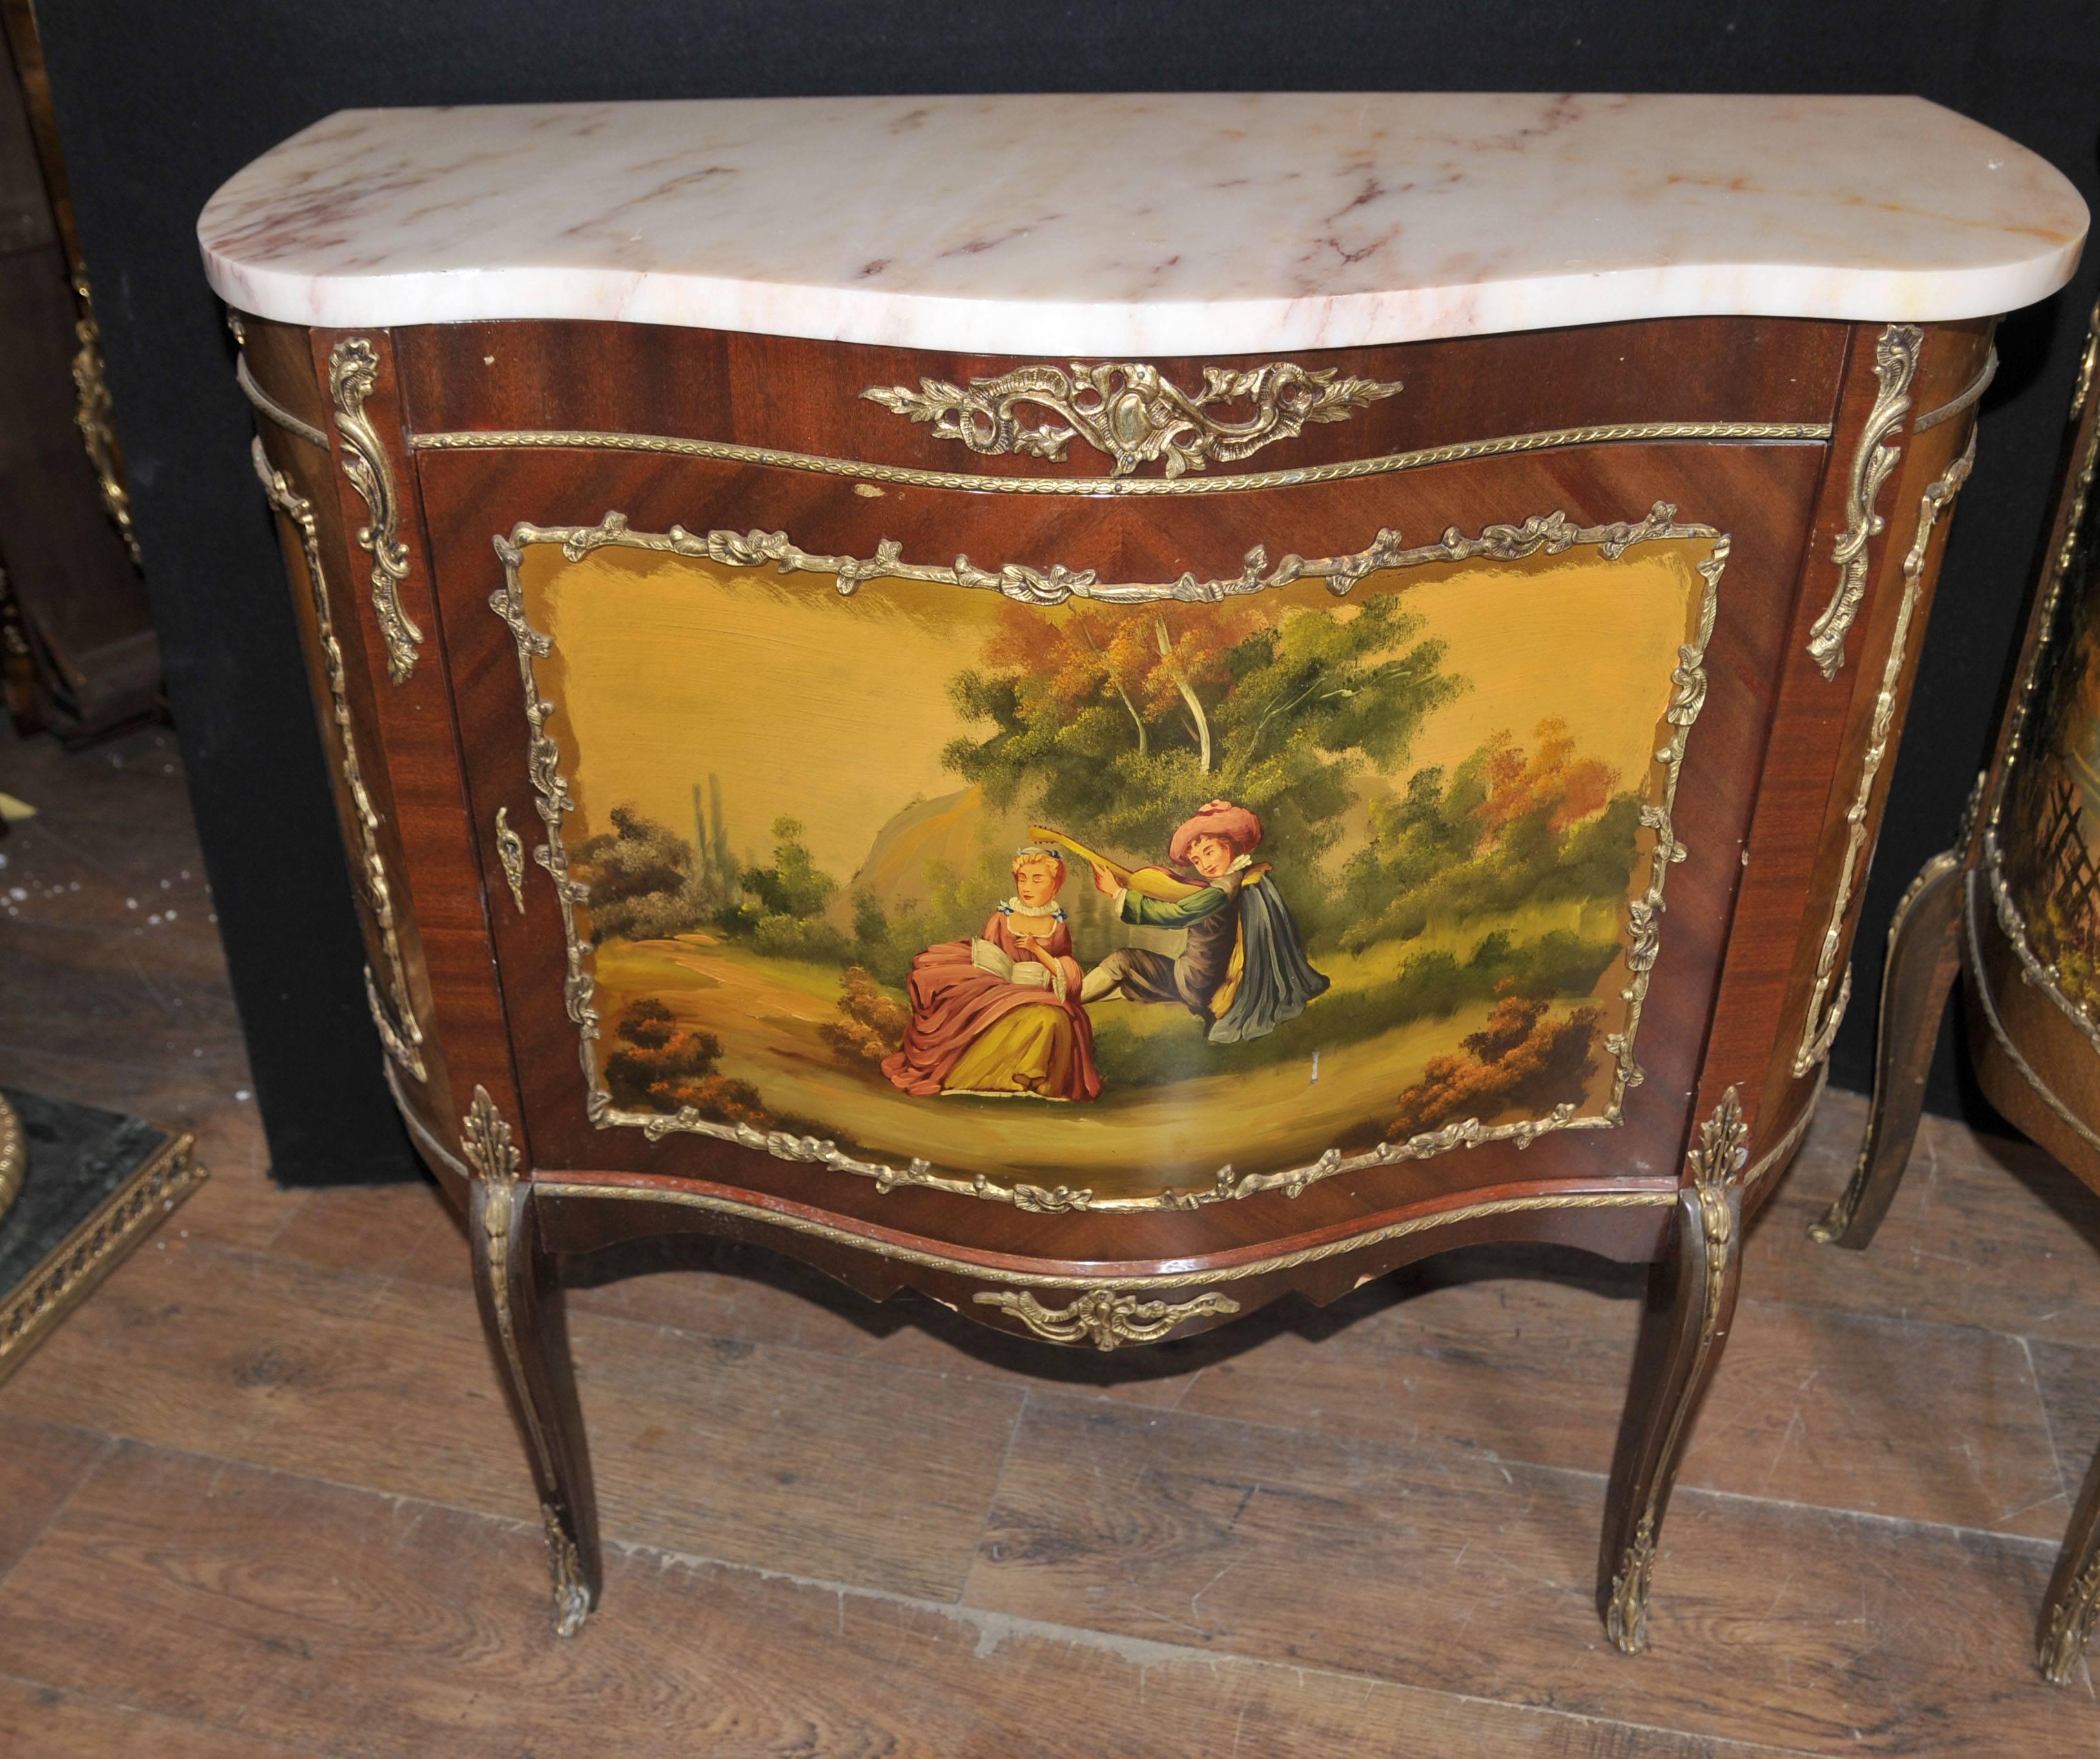 Gorgeous pair of French antique Vernis Martin style painted cabinets.
In French interior design, Vernis Martin is a type of imitation lacquer named after the French brothers. Guillaume and Etienne-Simon Martin.
Painted panels show lovely scenes of